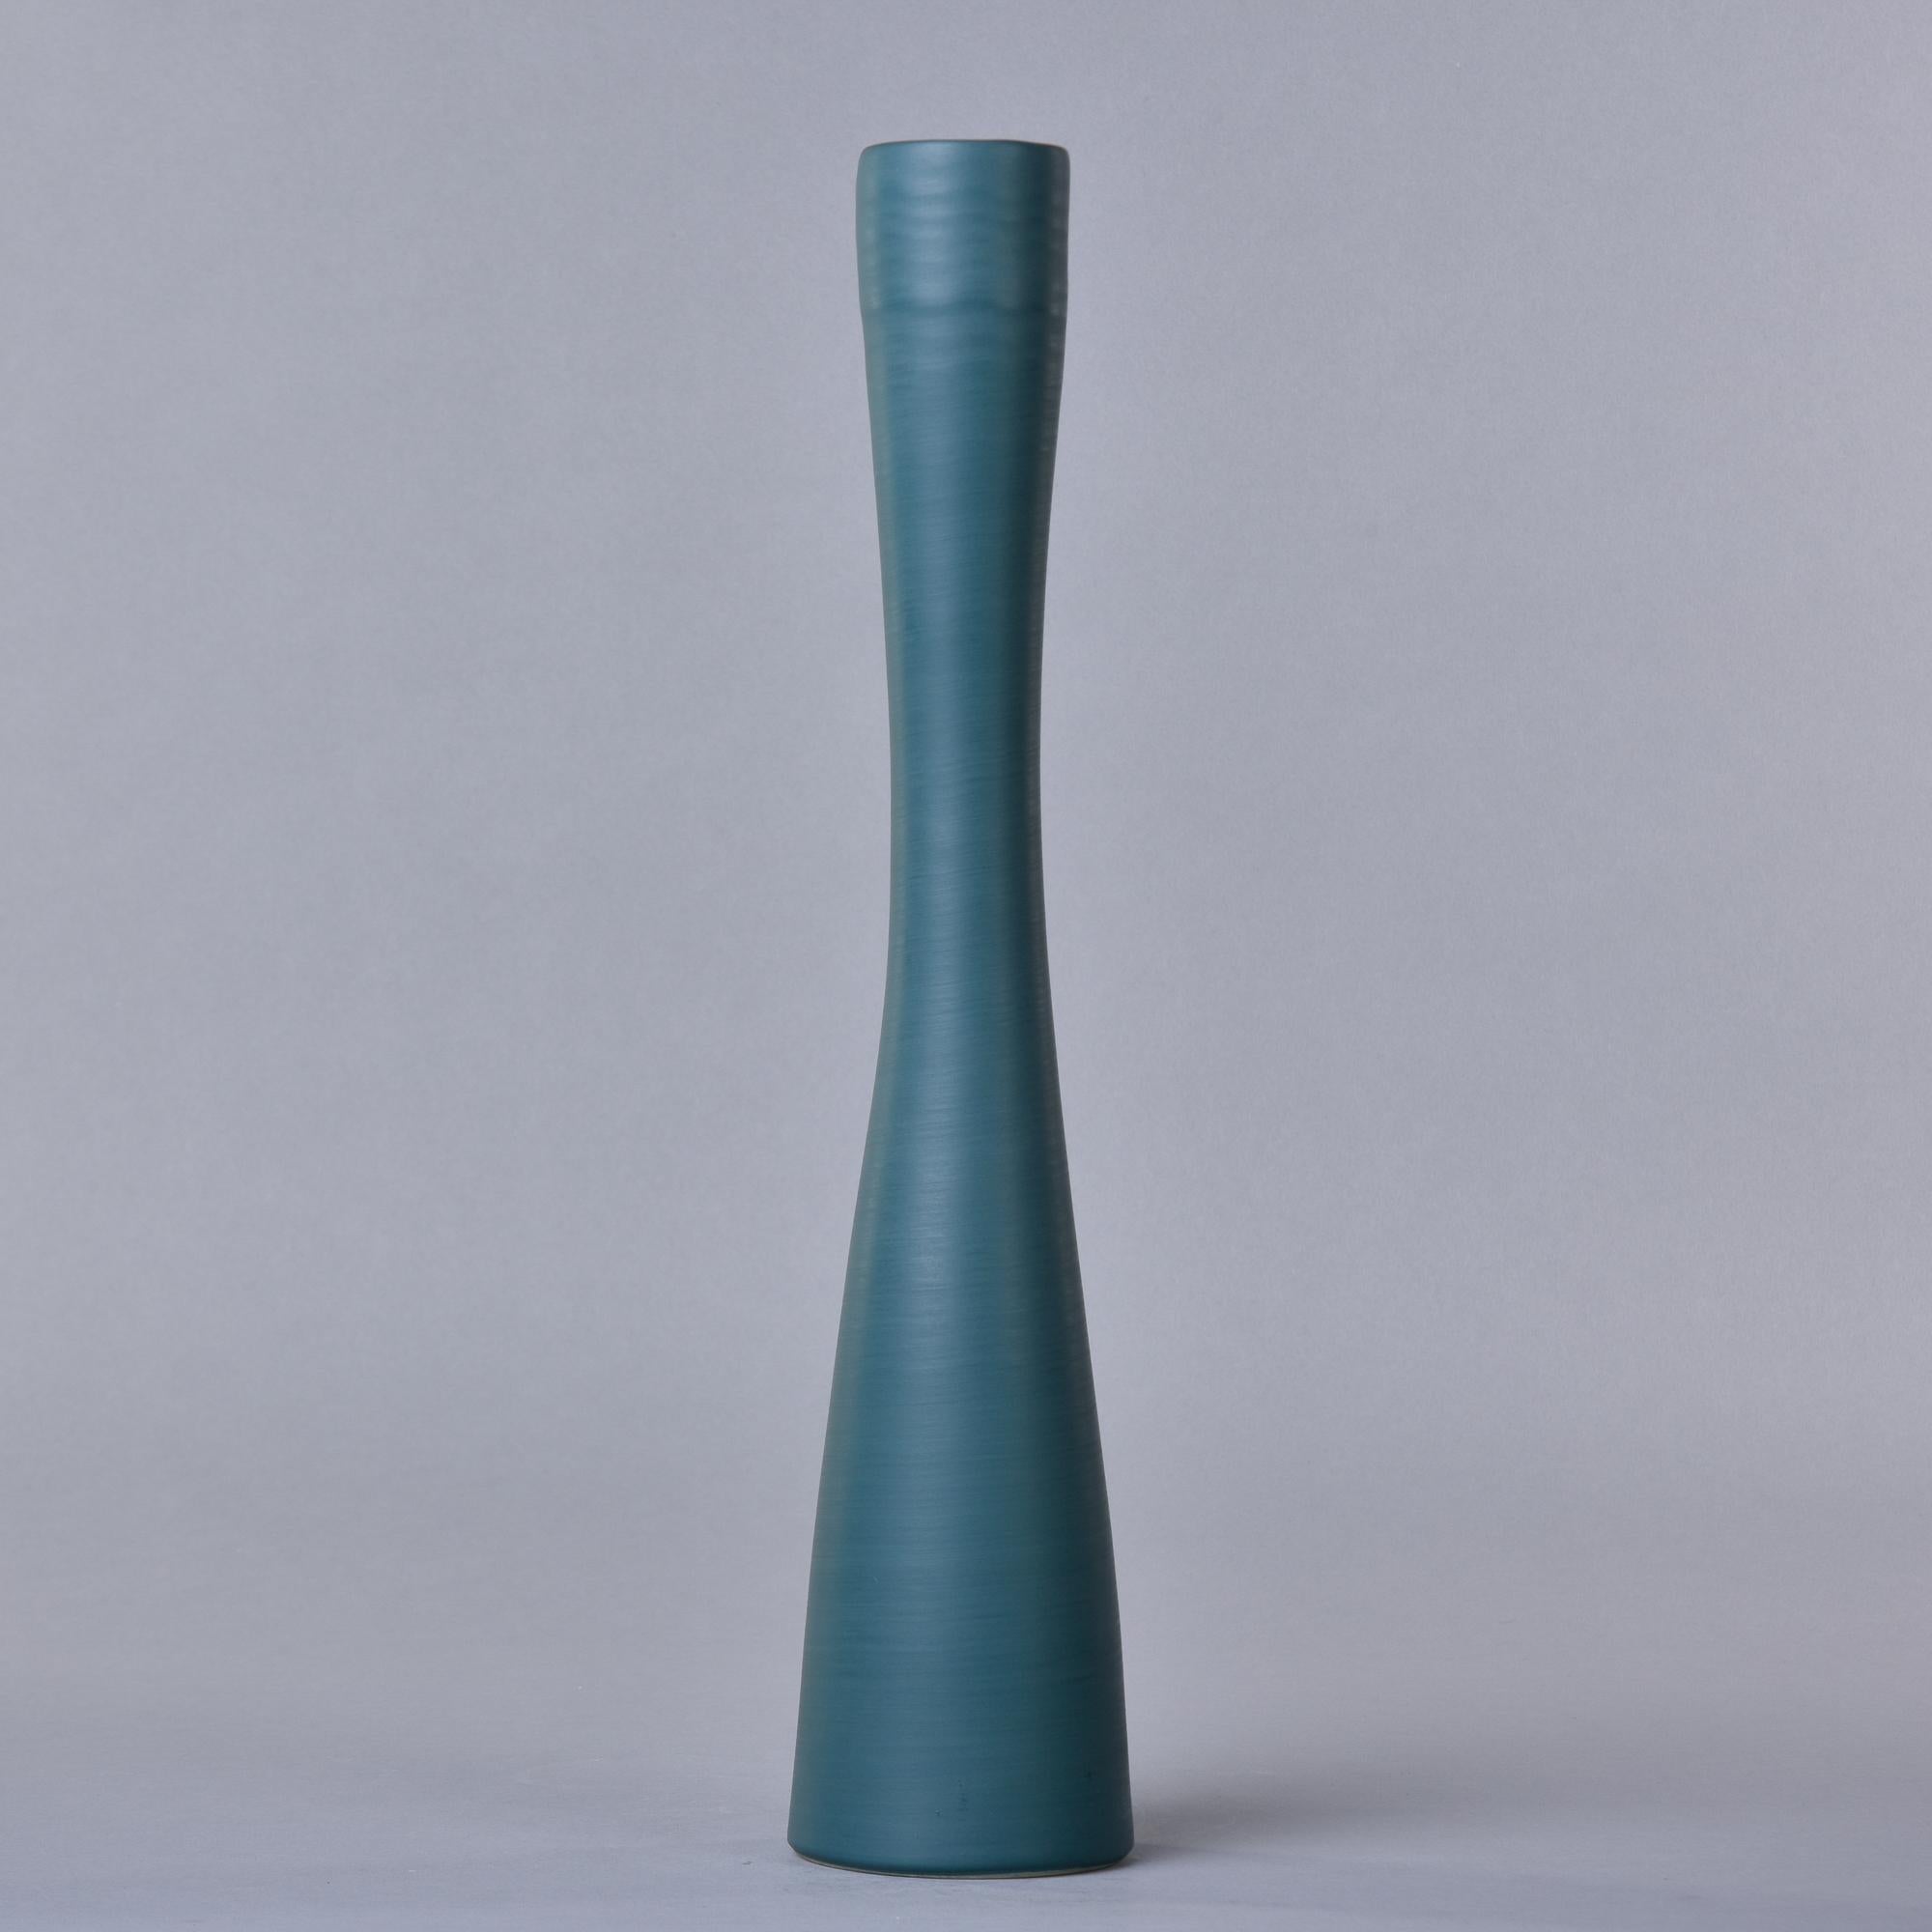 New and made in Italy by Rina Menardi, this tall slender vase is 18” high and has a saturated deep green colored glaze. Rina Menardi calls this shade of green Mint. The inside of the vase has a contrasting soft black wash glaze. Other colors and